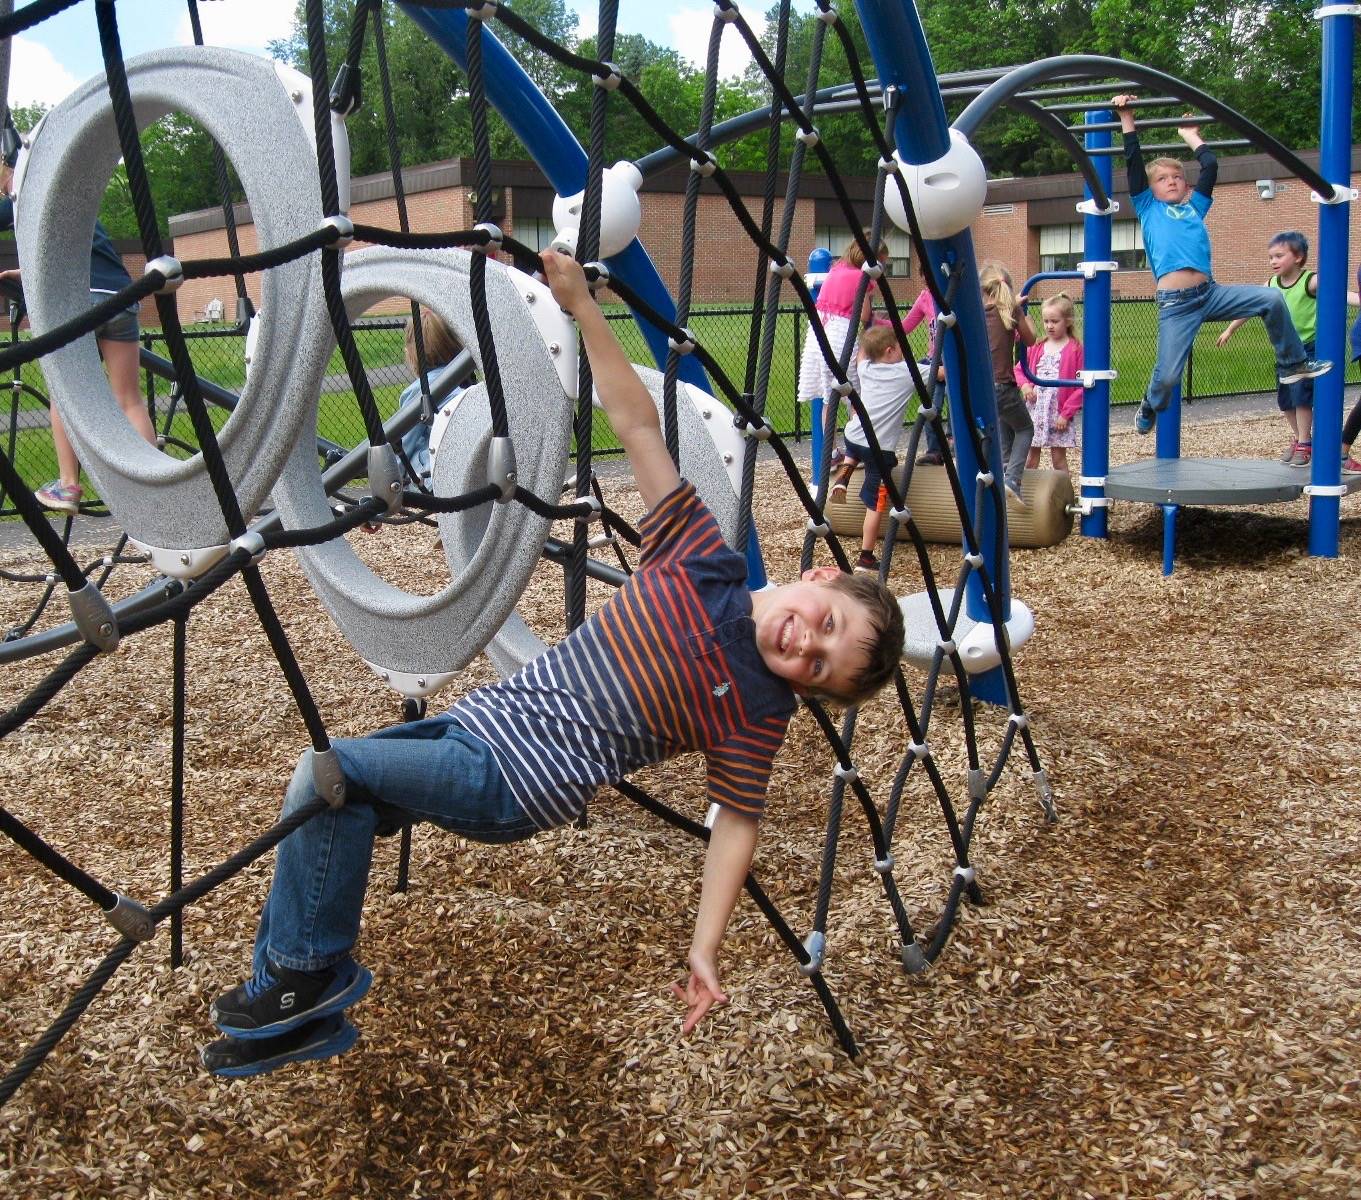 A student hanging out on the playground.